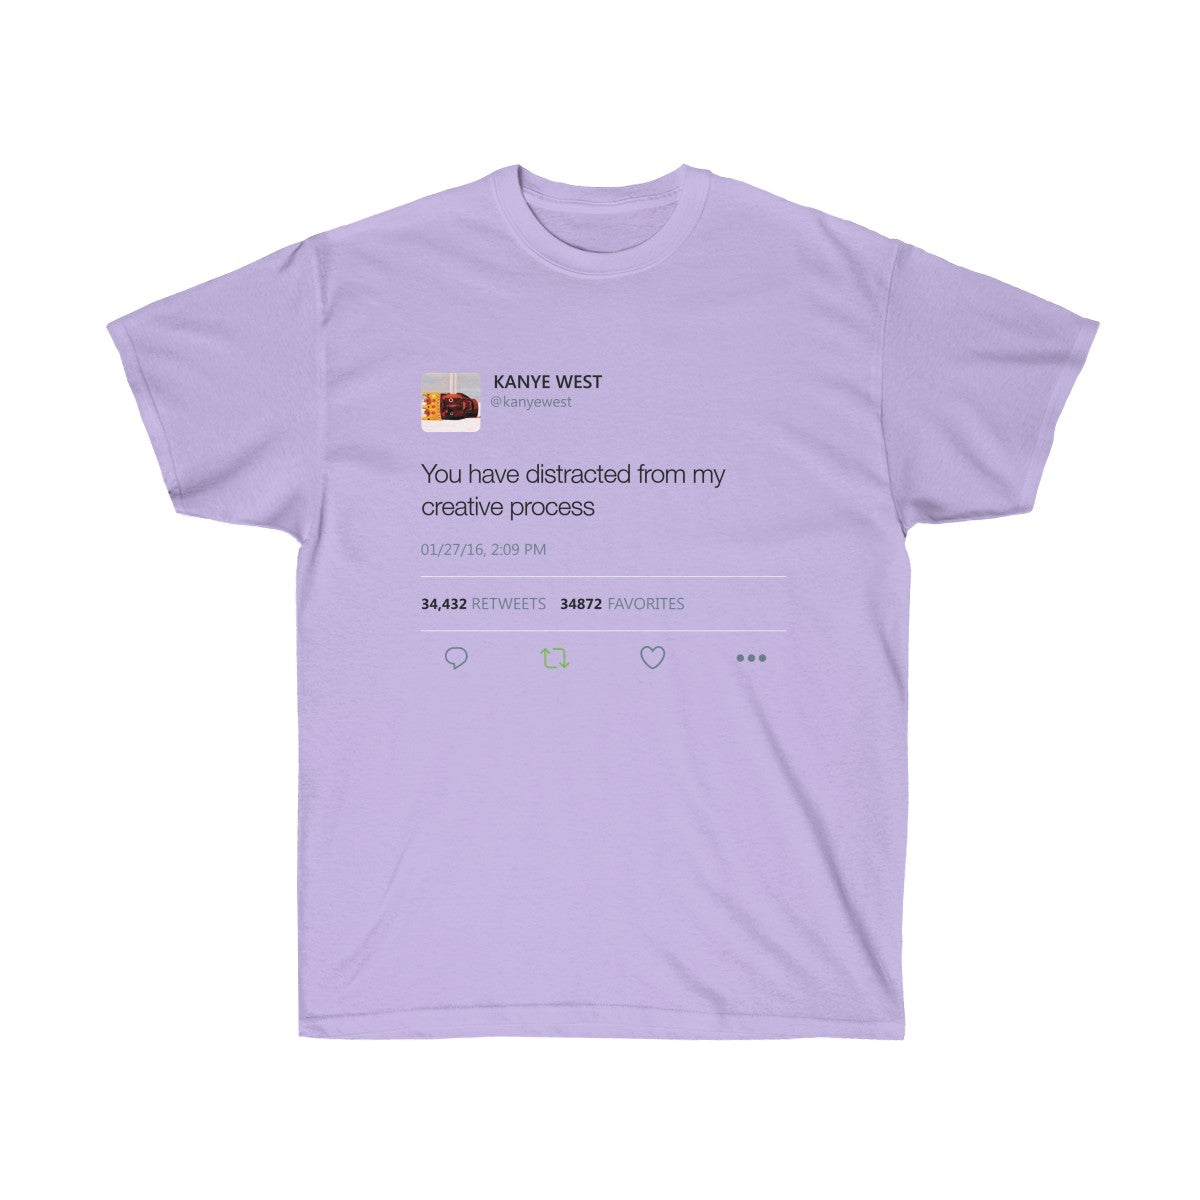 You have distracted from my creative process - Kanye West Tweet T-Shirt-Orchid-S-Archethype